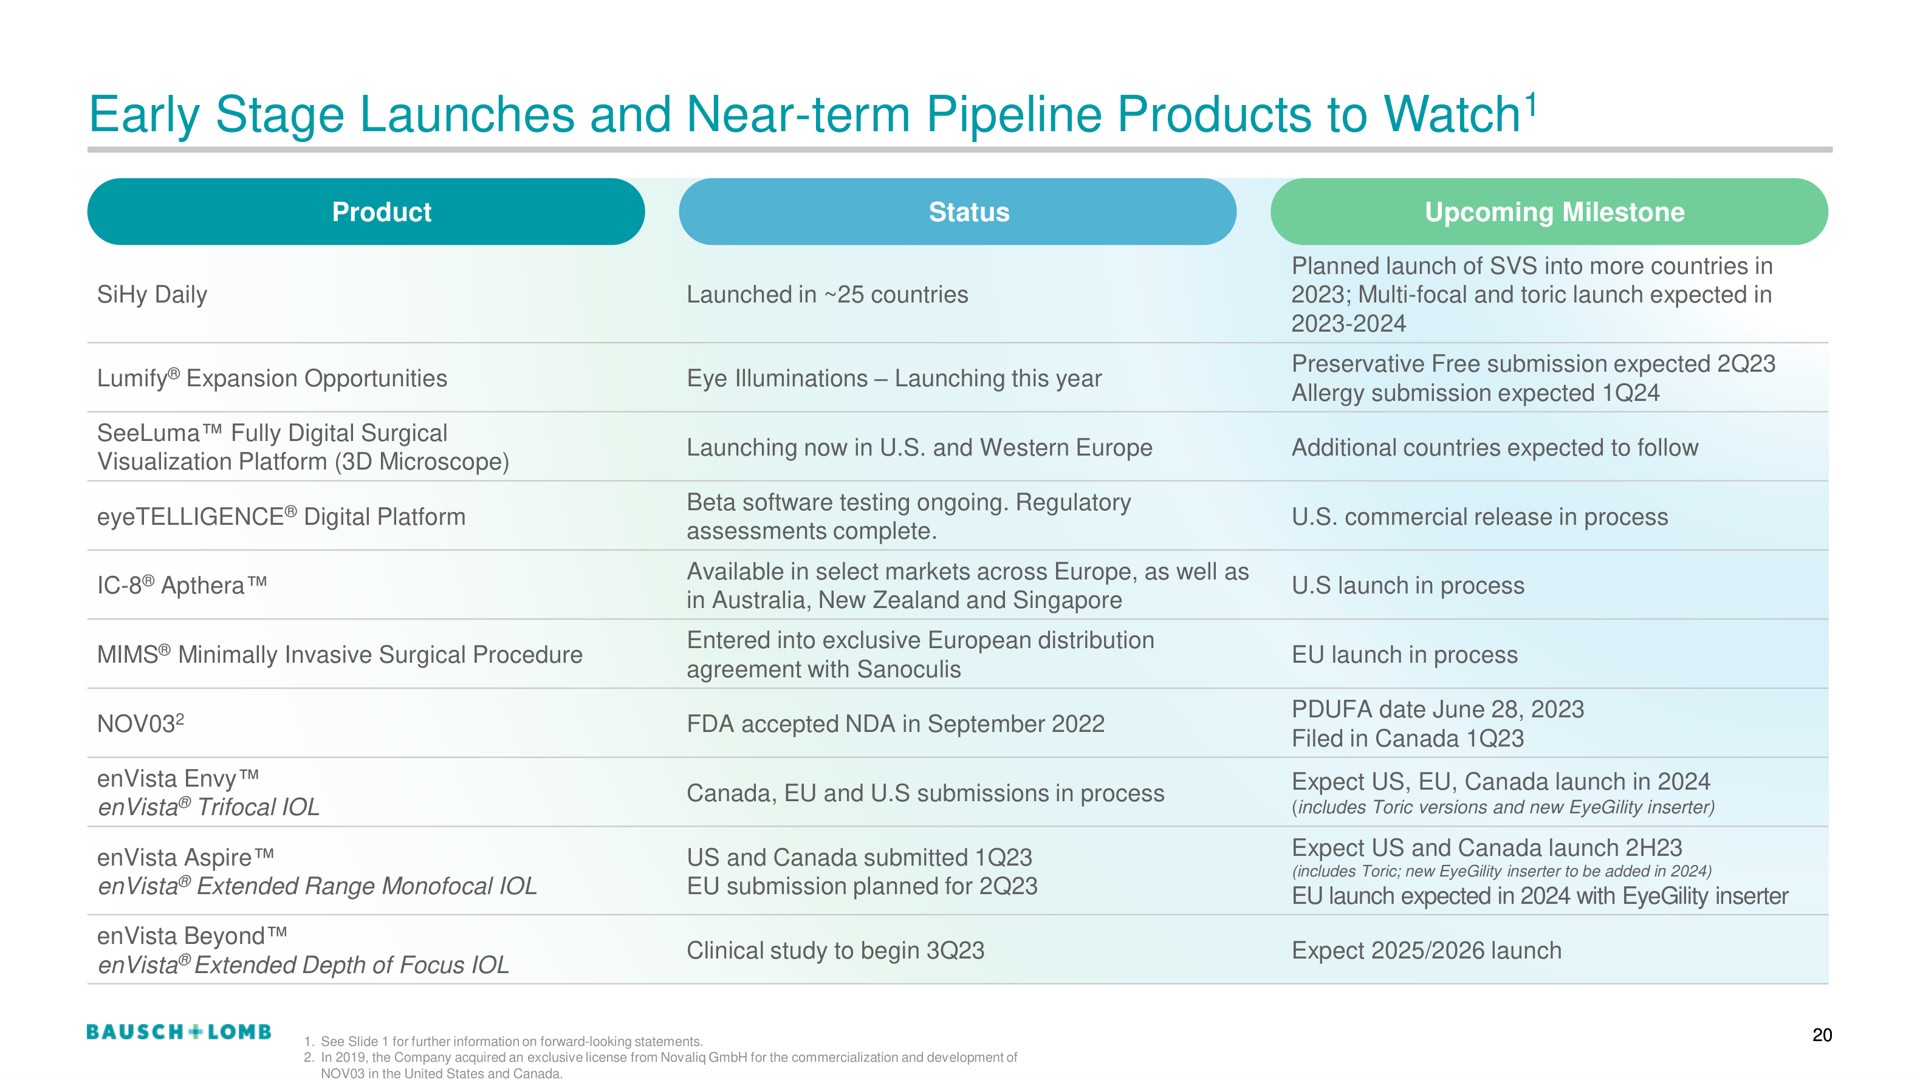 early stage launches and near term pipeline products to watch watch | Bausch+Lomb